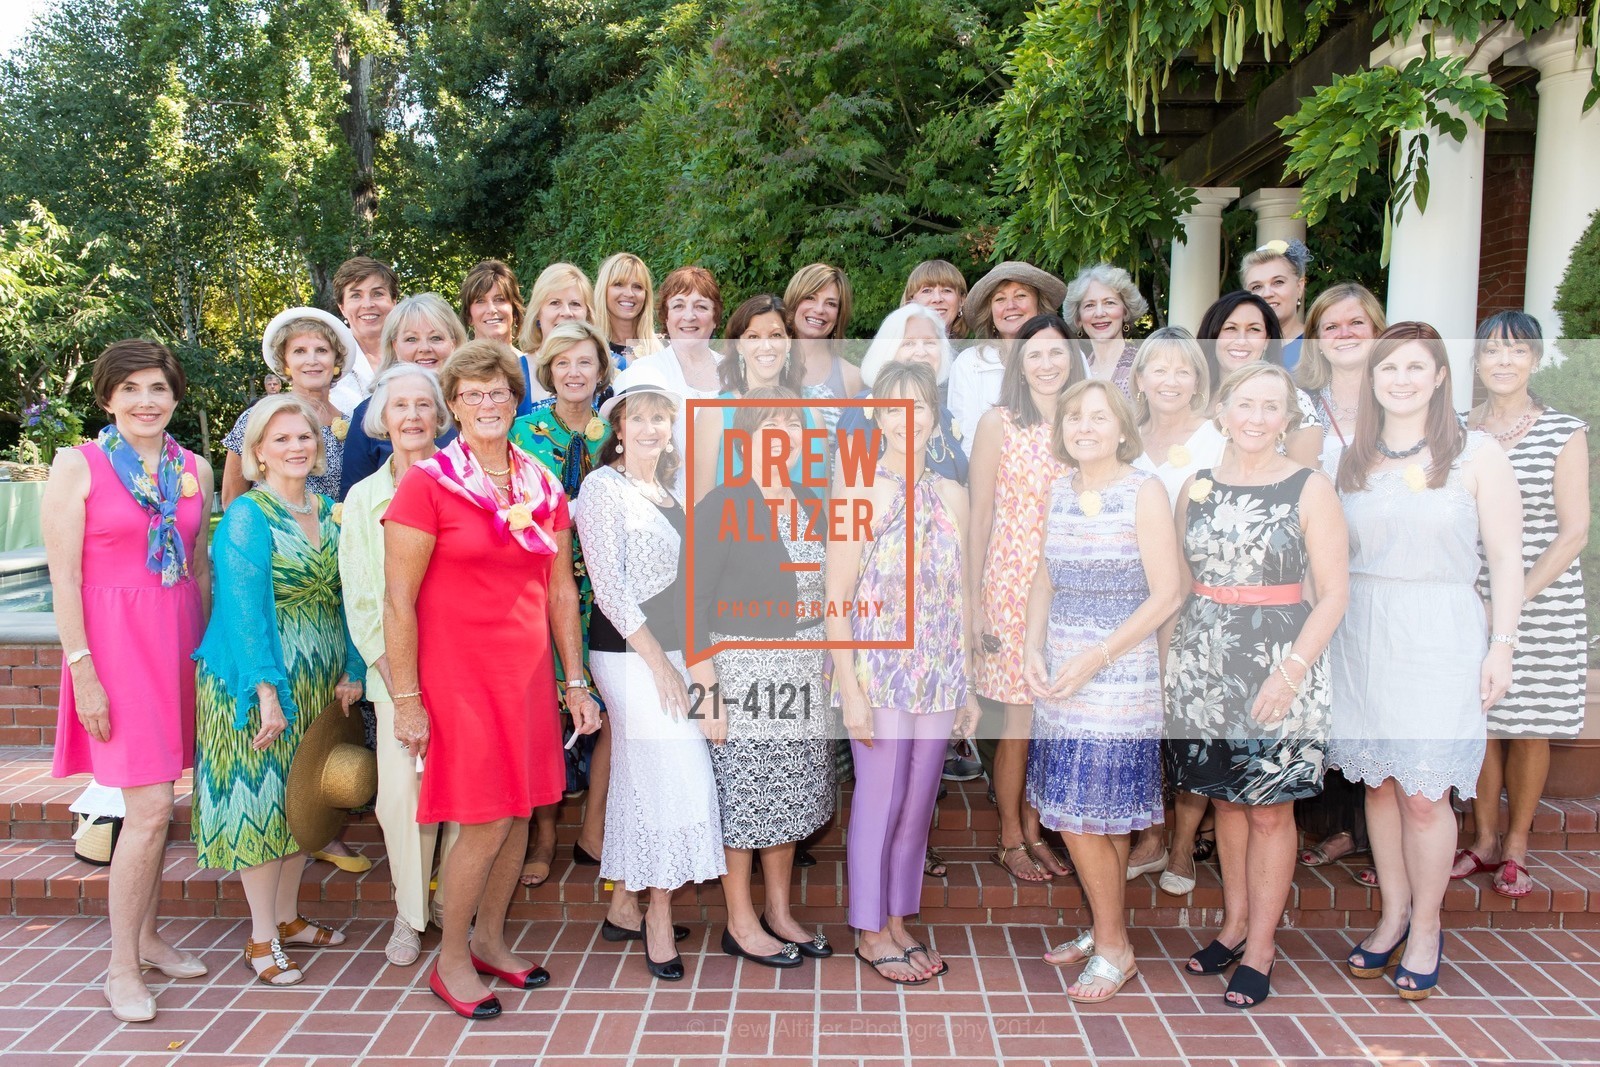 Group Picture, Photo #21-4121